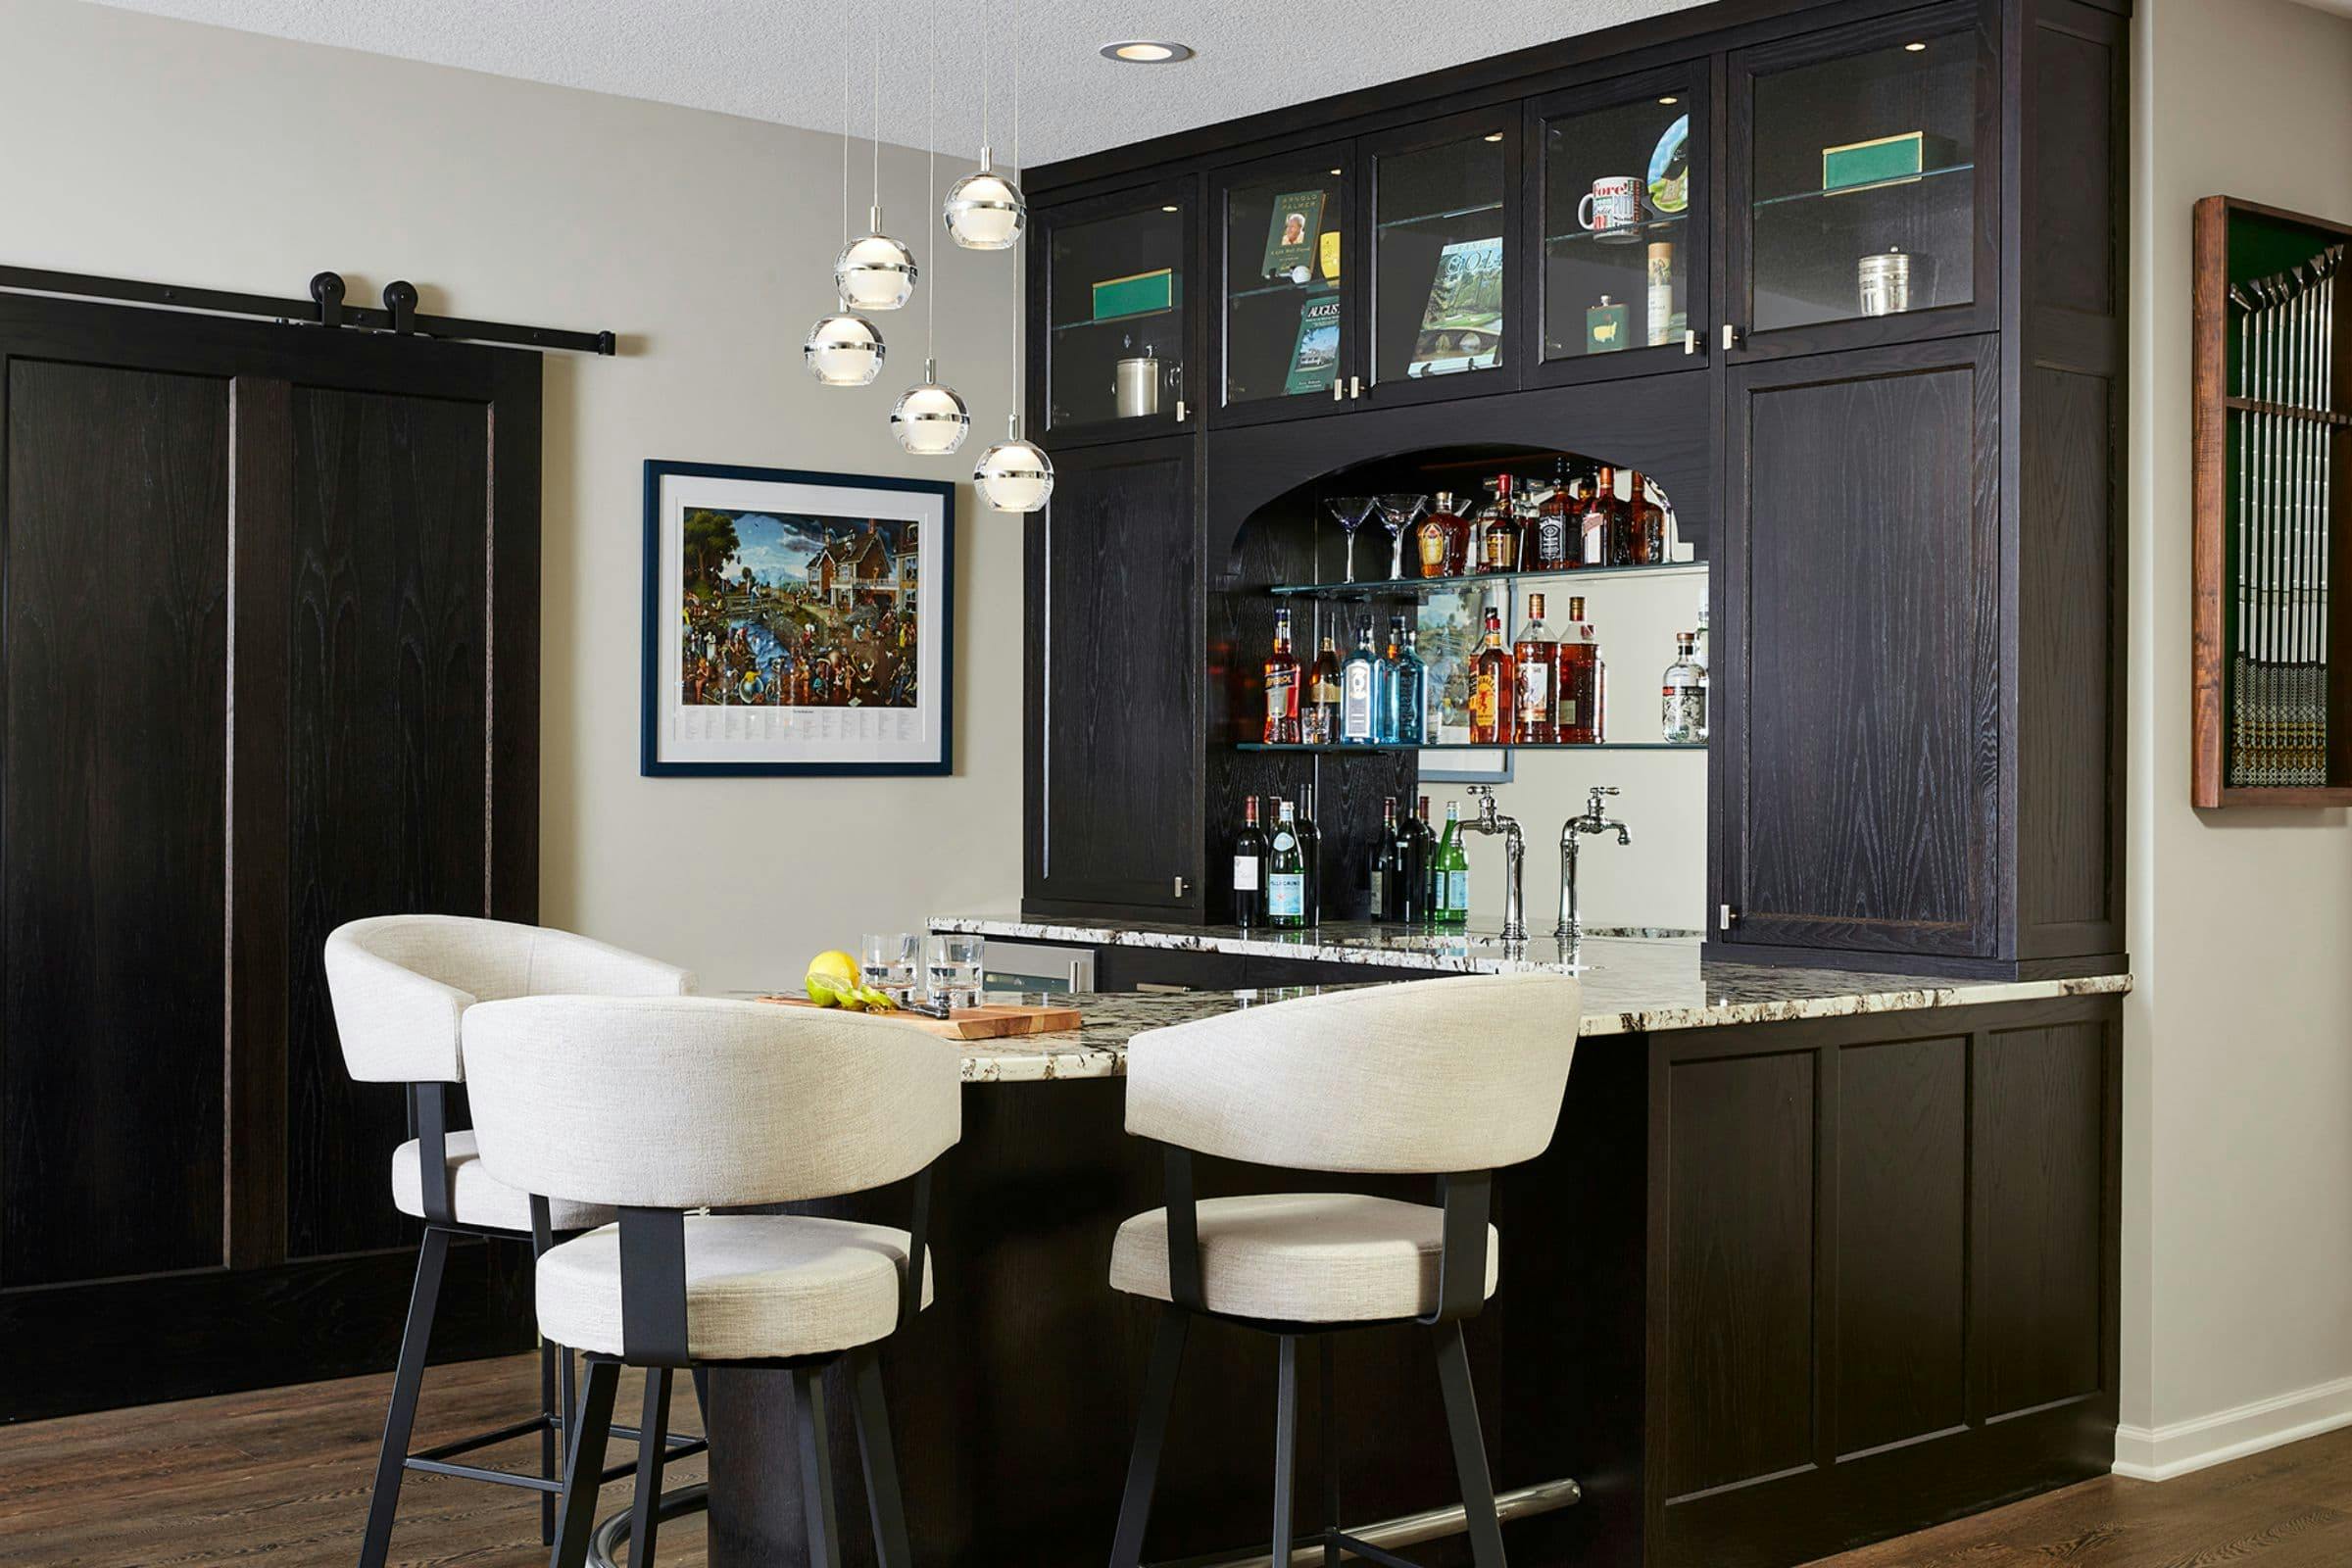 dark cabinetry with paneled front used in an elegant lower level home bar design with seating and light fixture